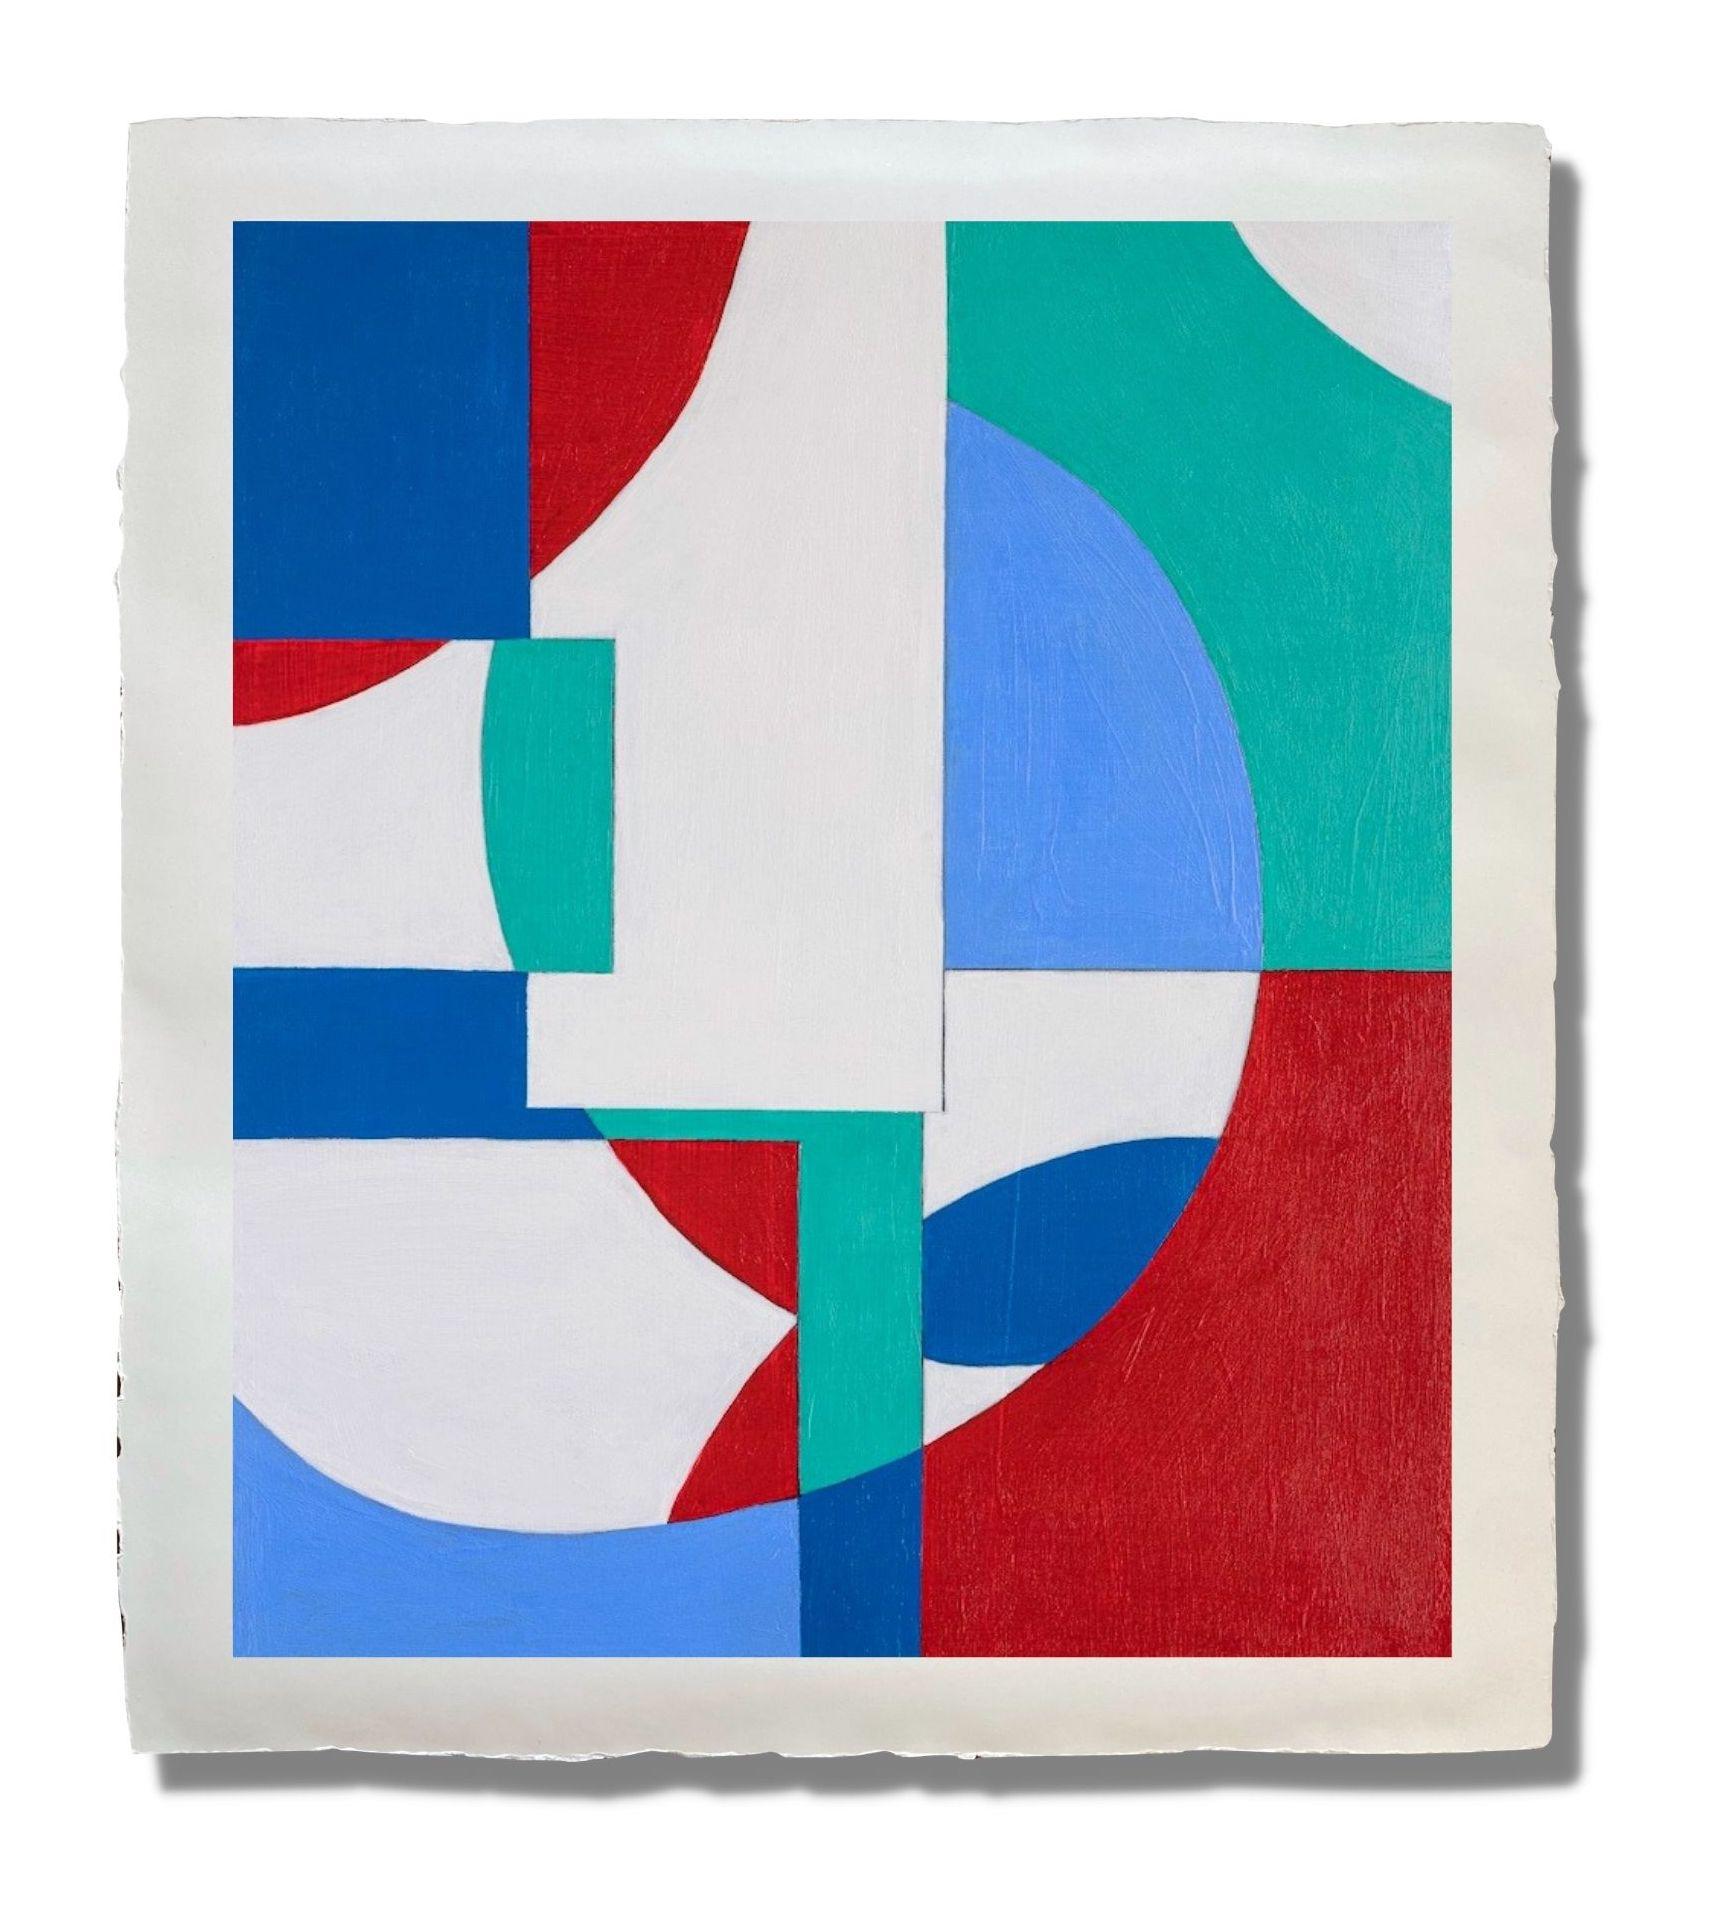 GA1220 Limited edition 2/10 giclee geometric abstraction signed print - Print by Zach Touchon